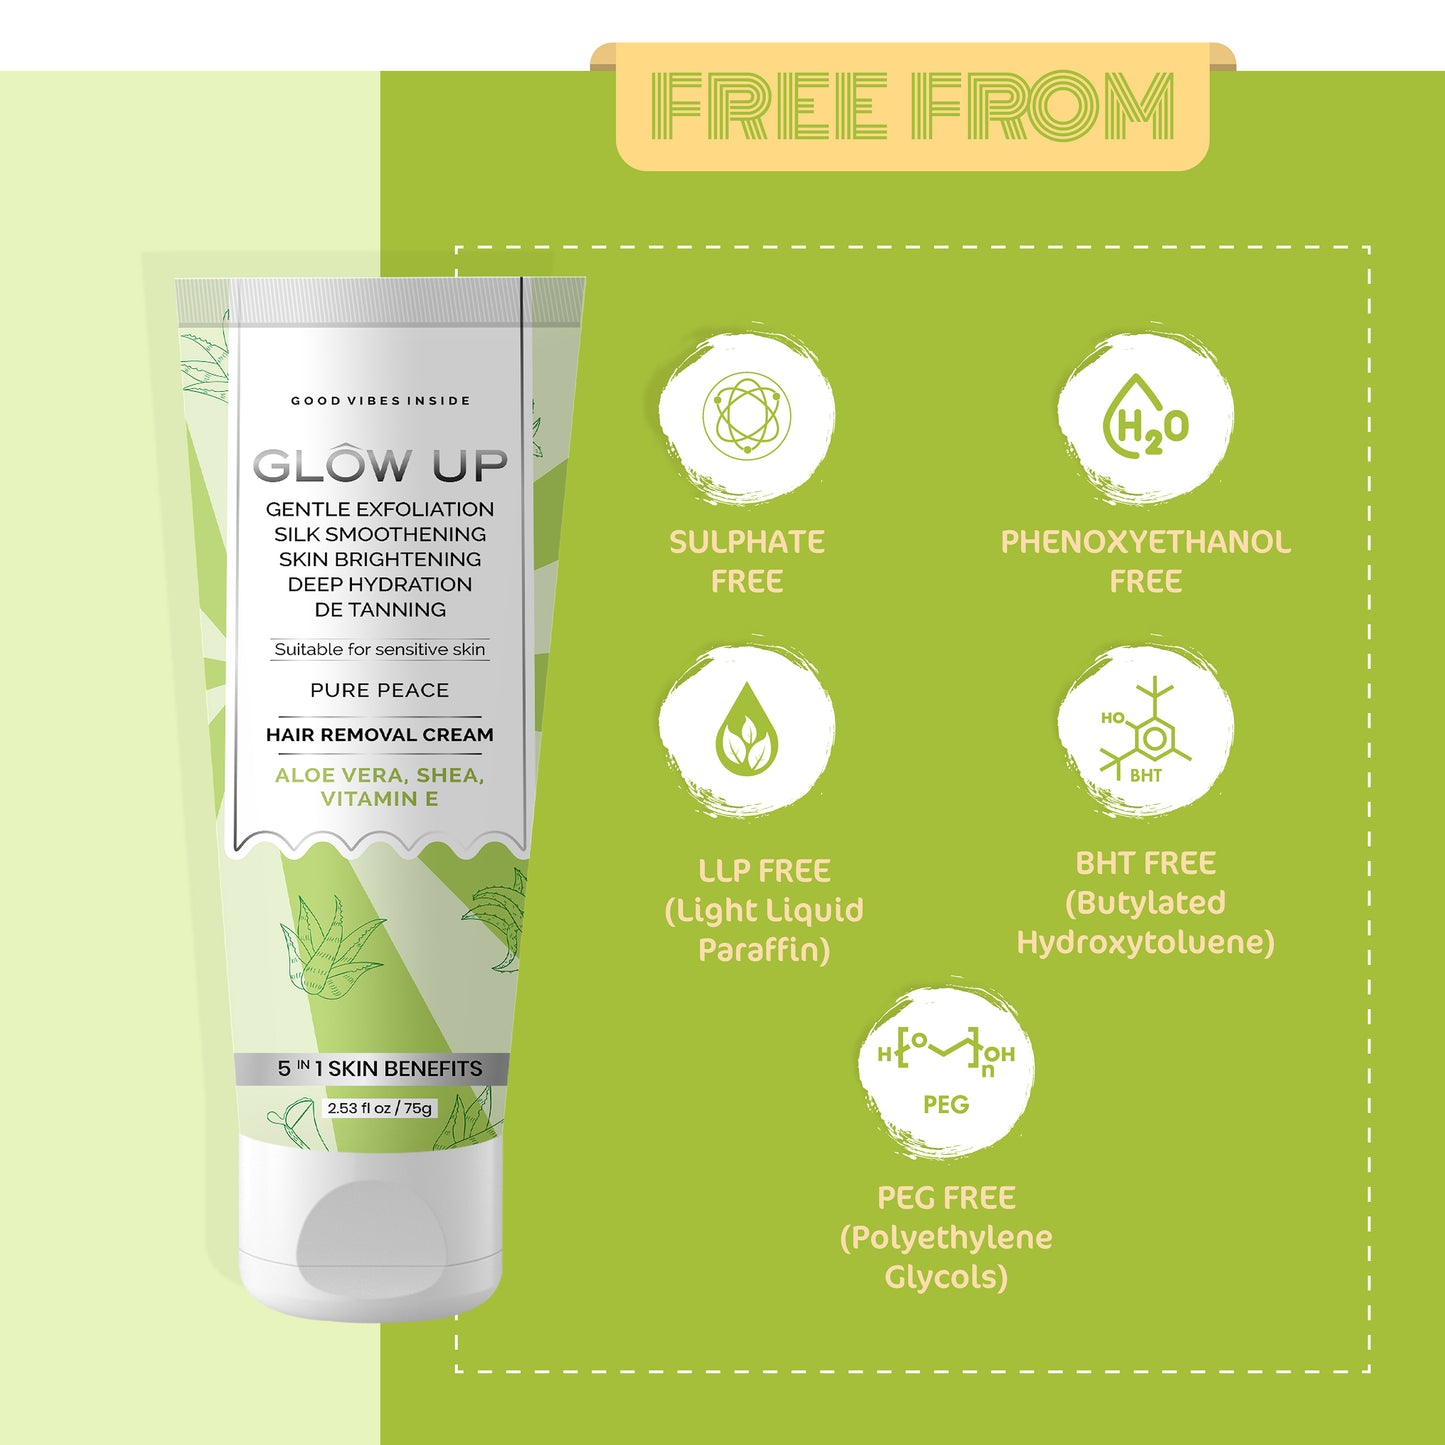 Glow up pure peace hair removal cream free from